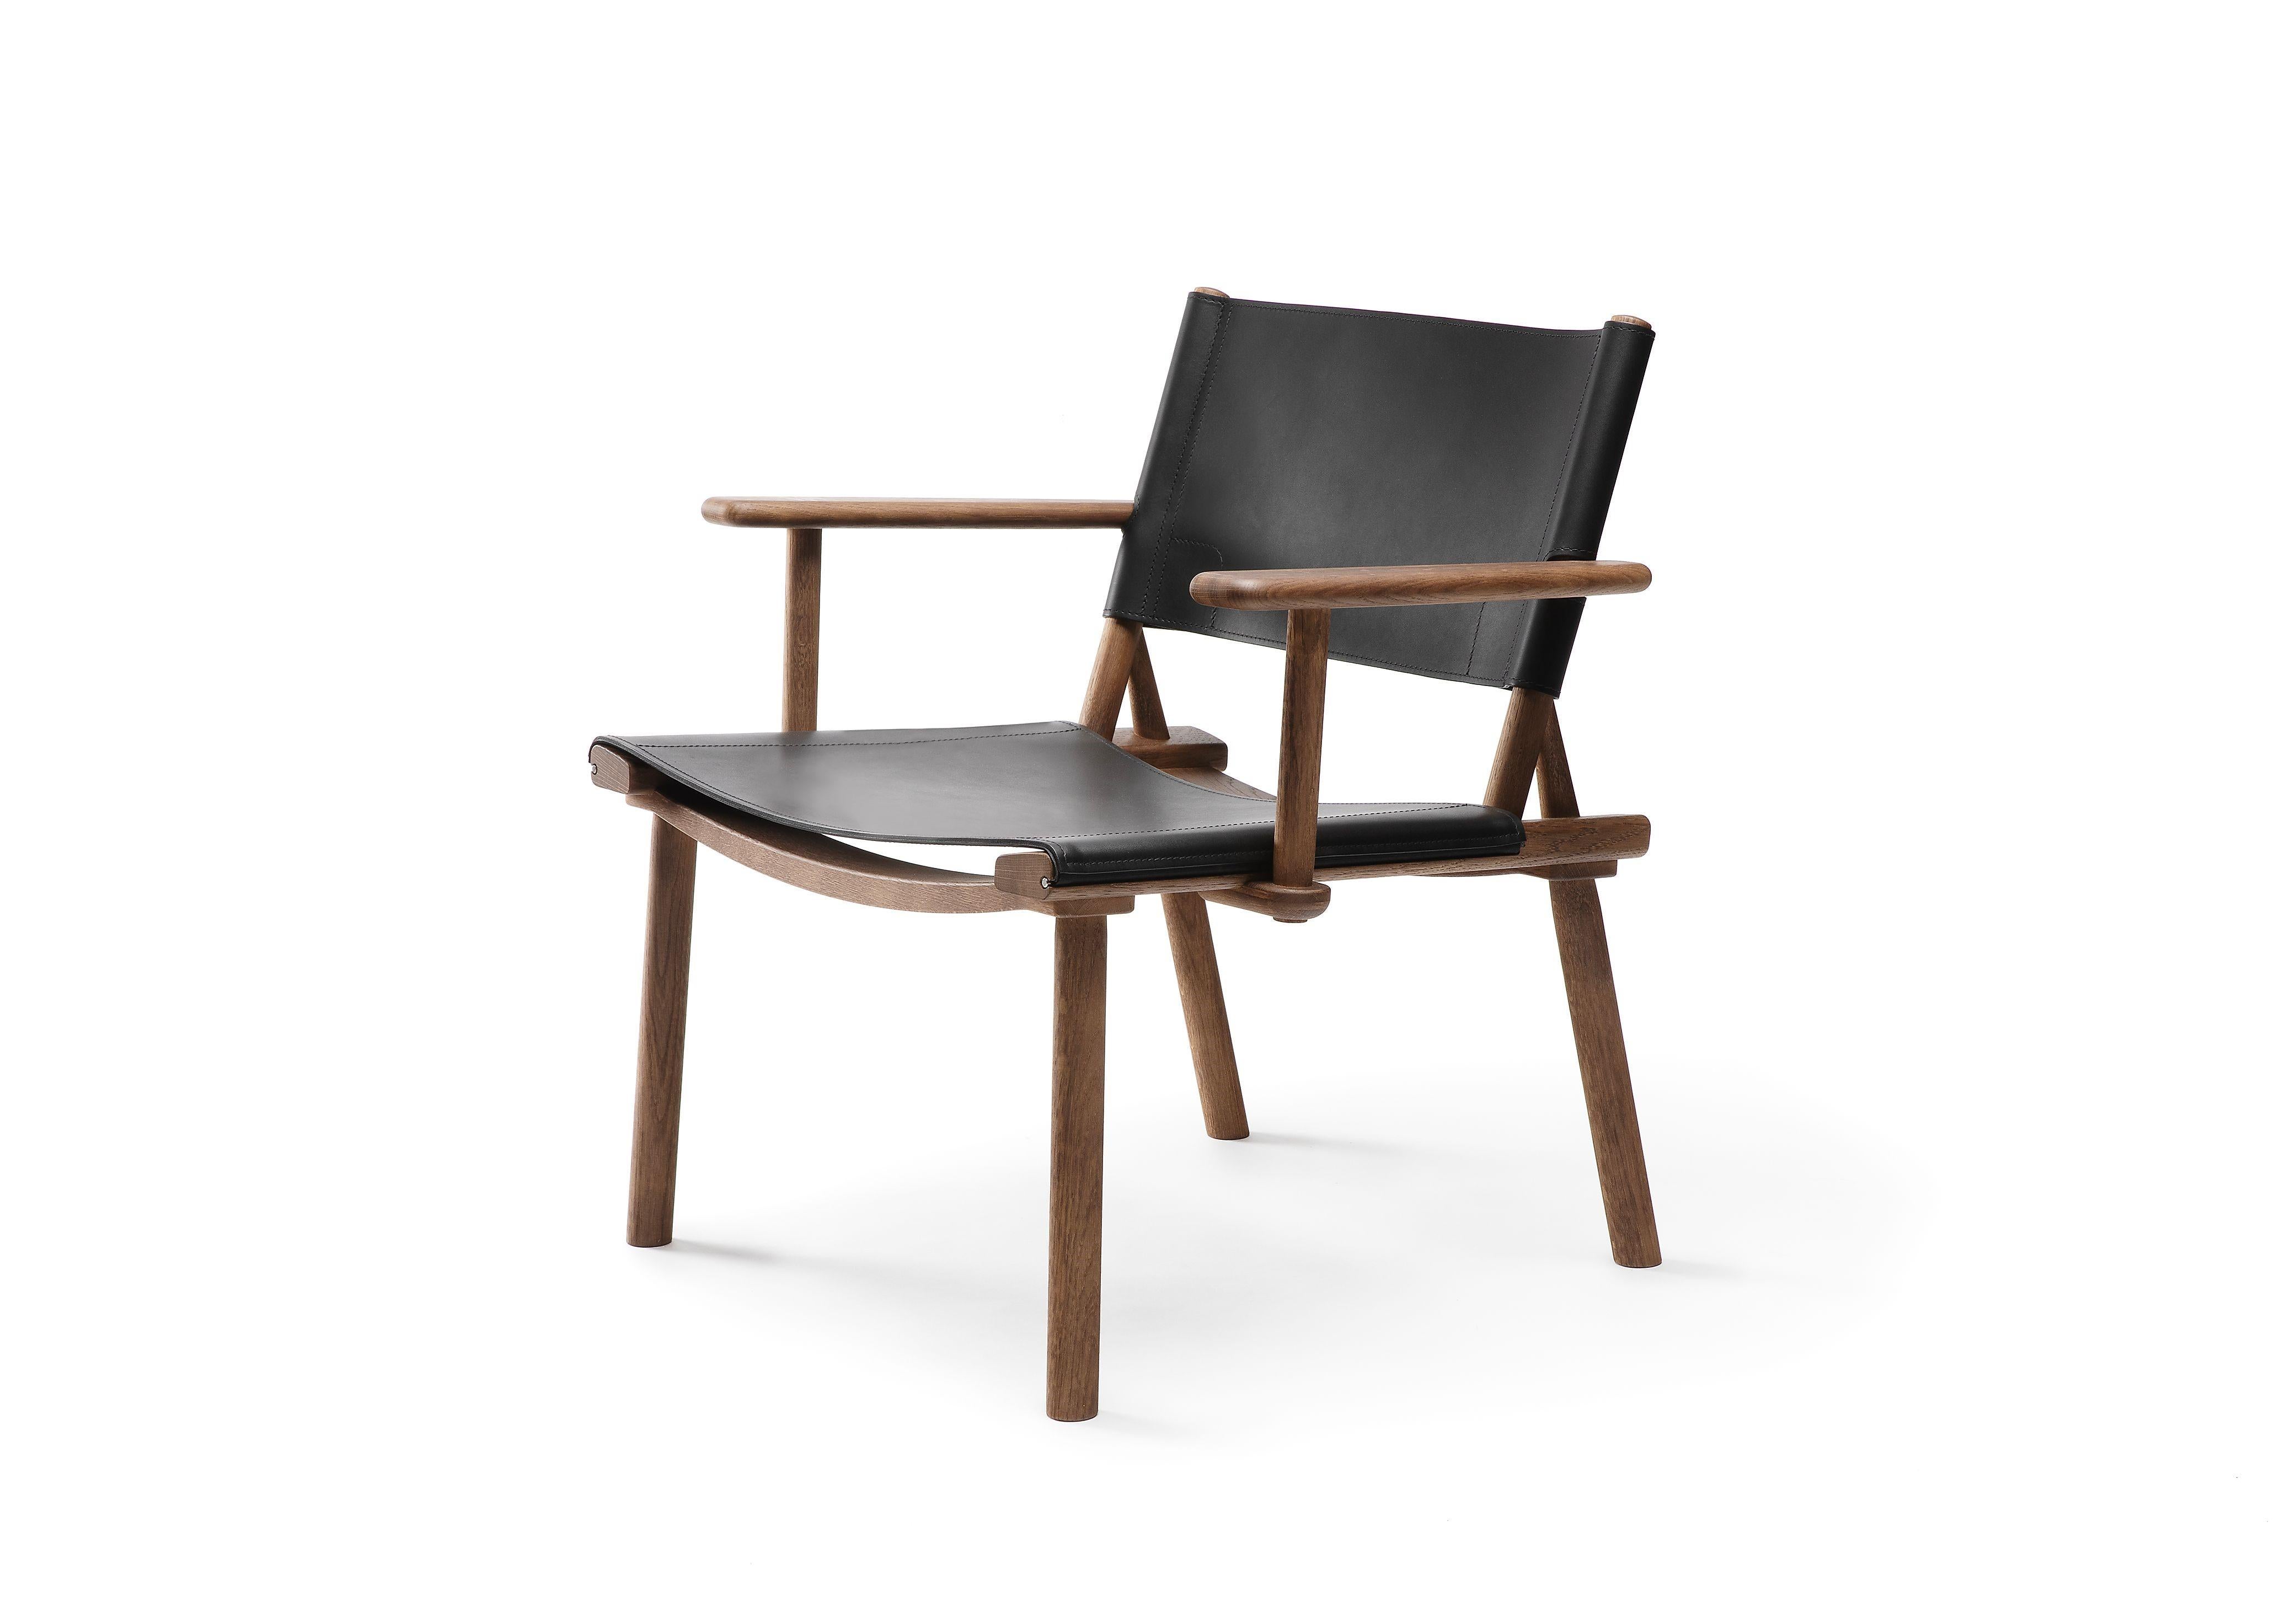 December Lounge Chair with leather upholstery by Jasper Morrison & Wataru Kumano For Sale 5